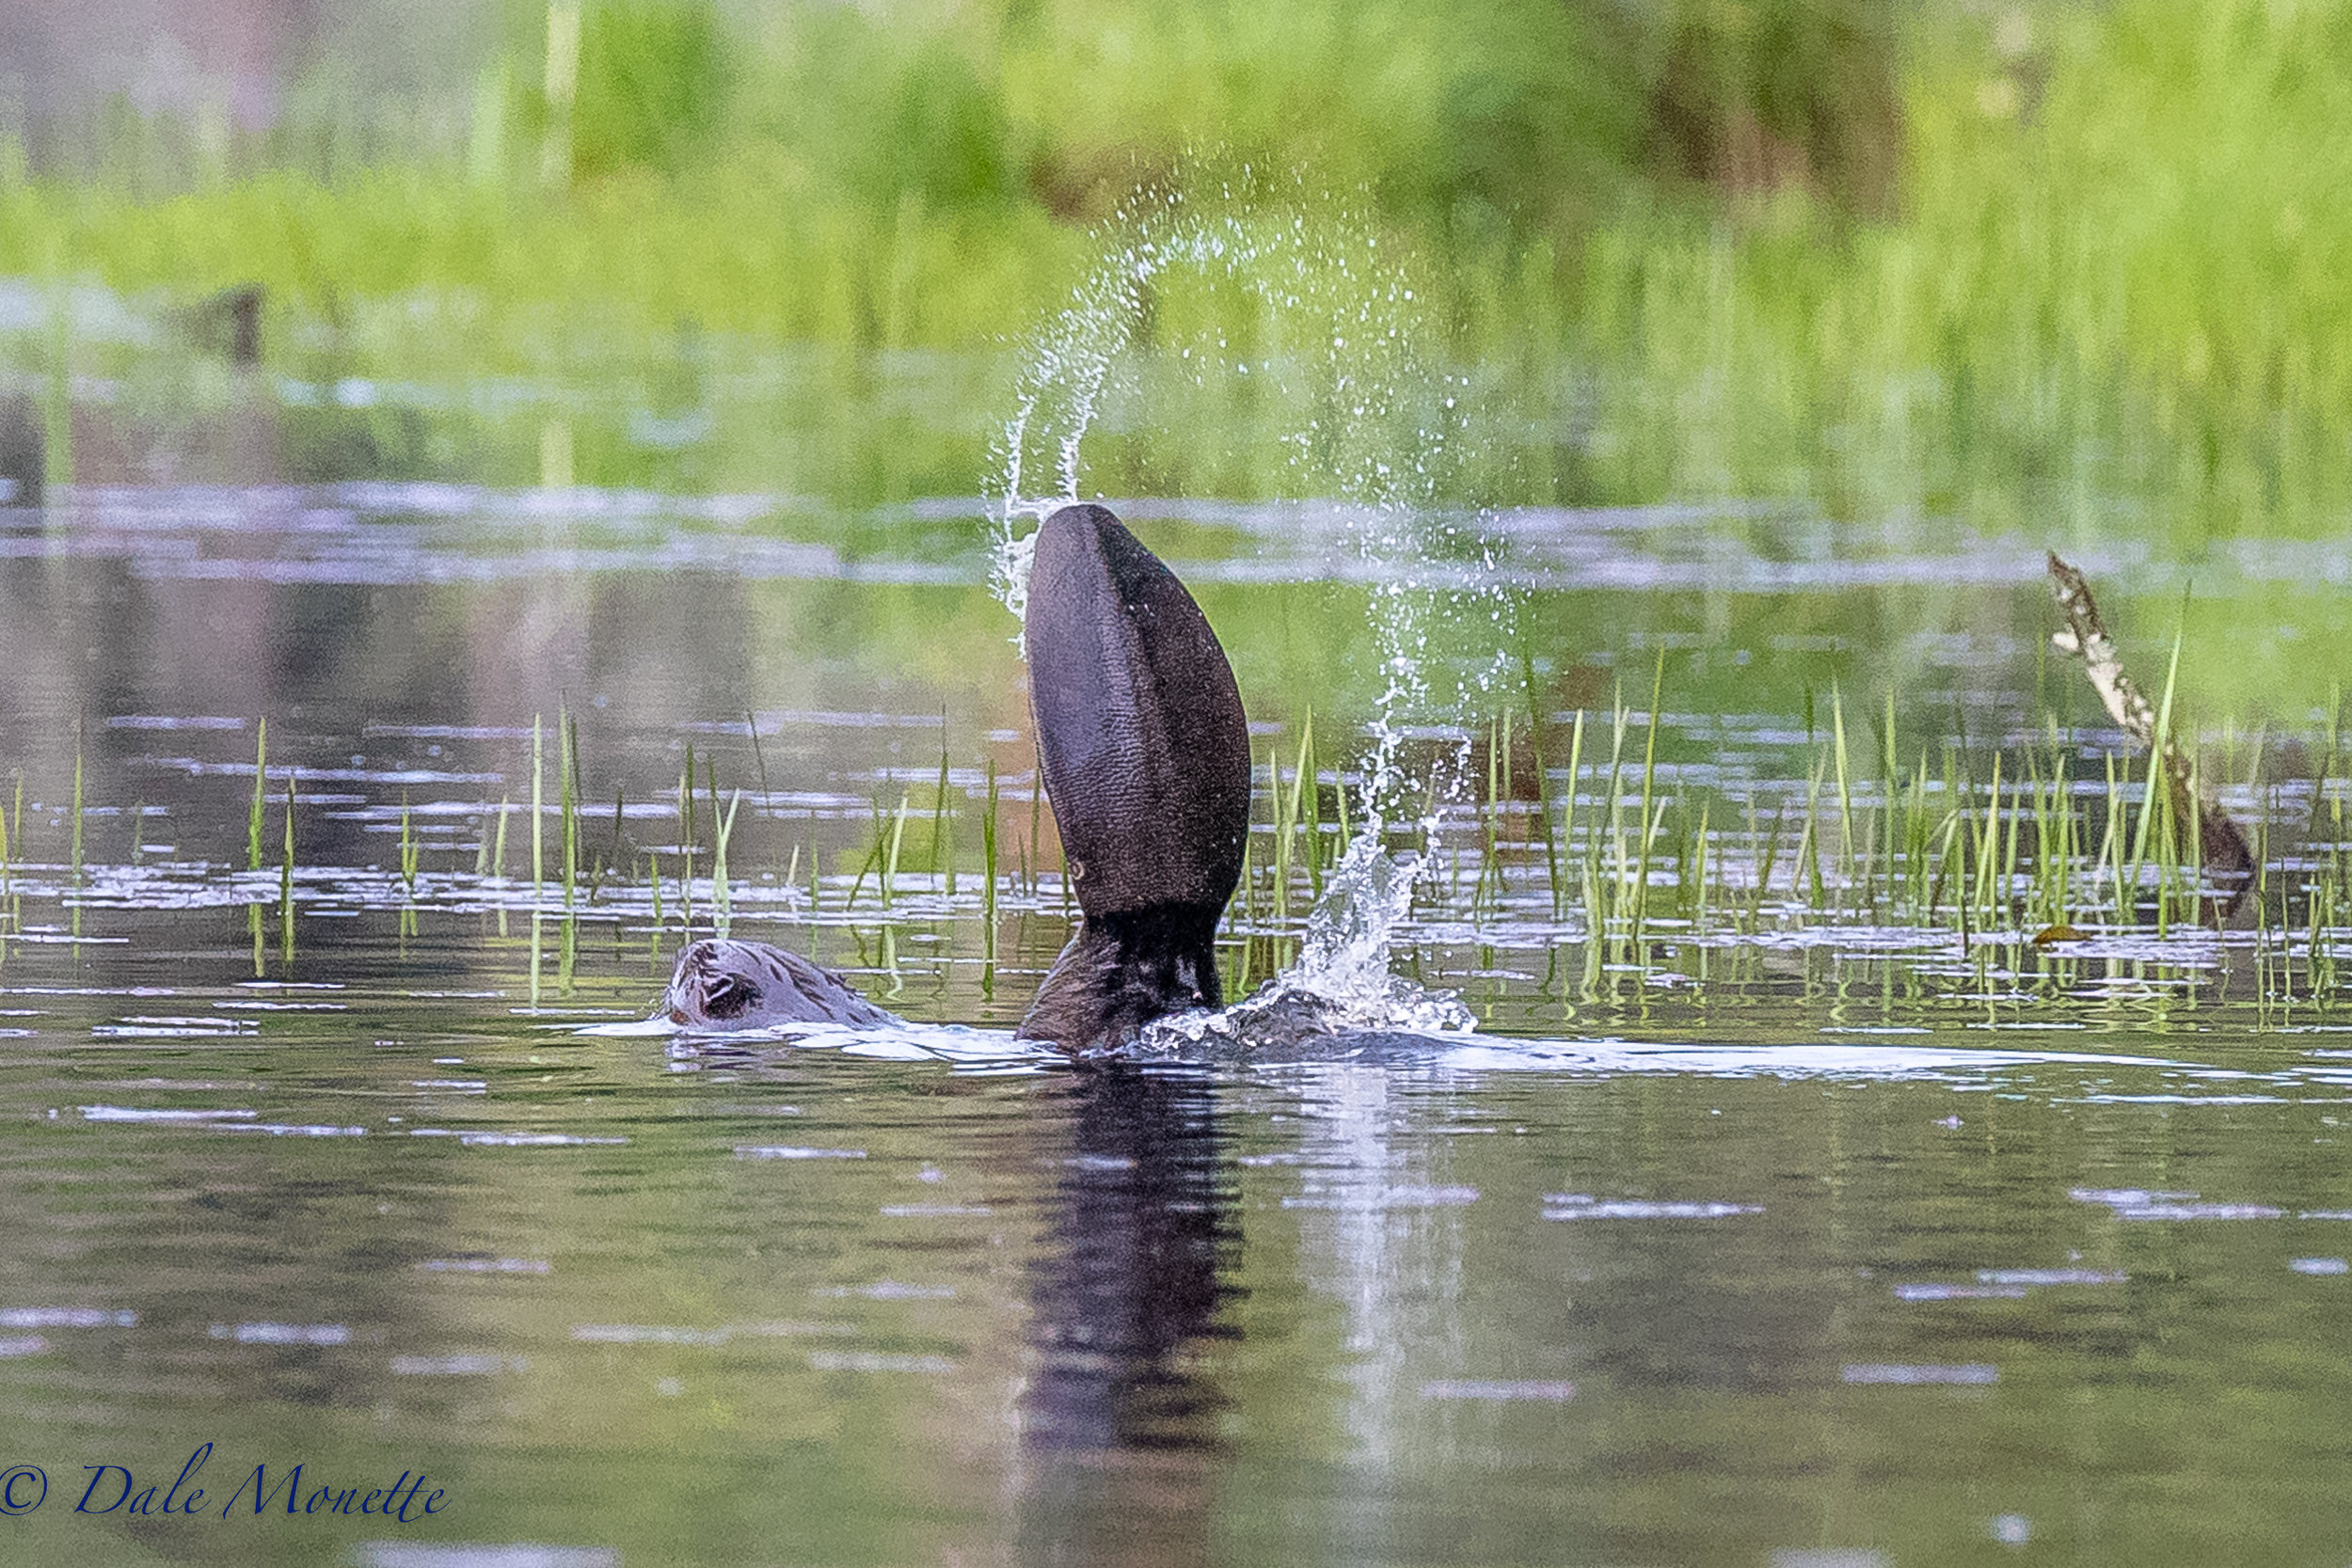   Beavers slap their tails in the water when they are upset or want you gone! &nbsp;It happens faster than a strike of lightning and its also a message to other beavers in the colony that danger is near. &nbsp;This was 30 minutes into my stay so I ig